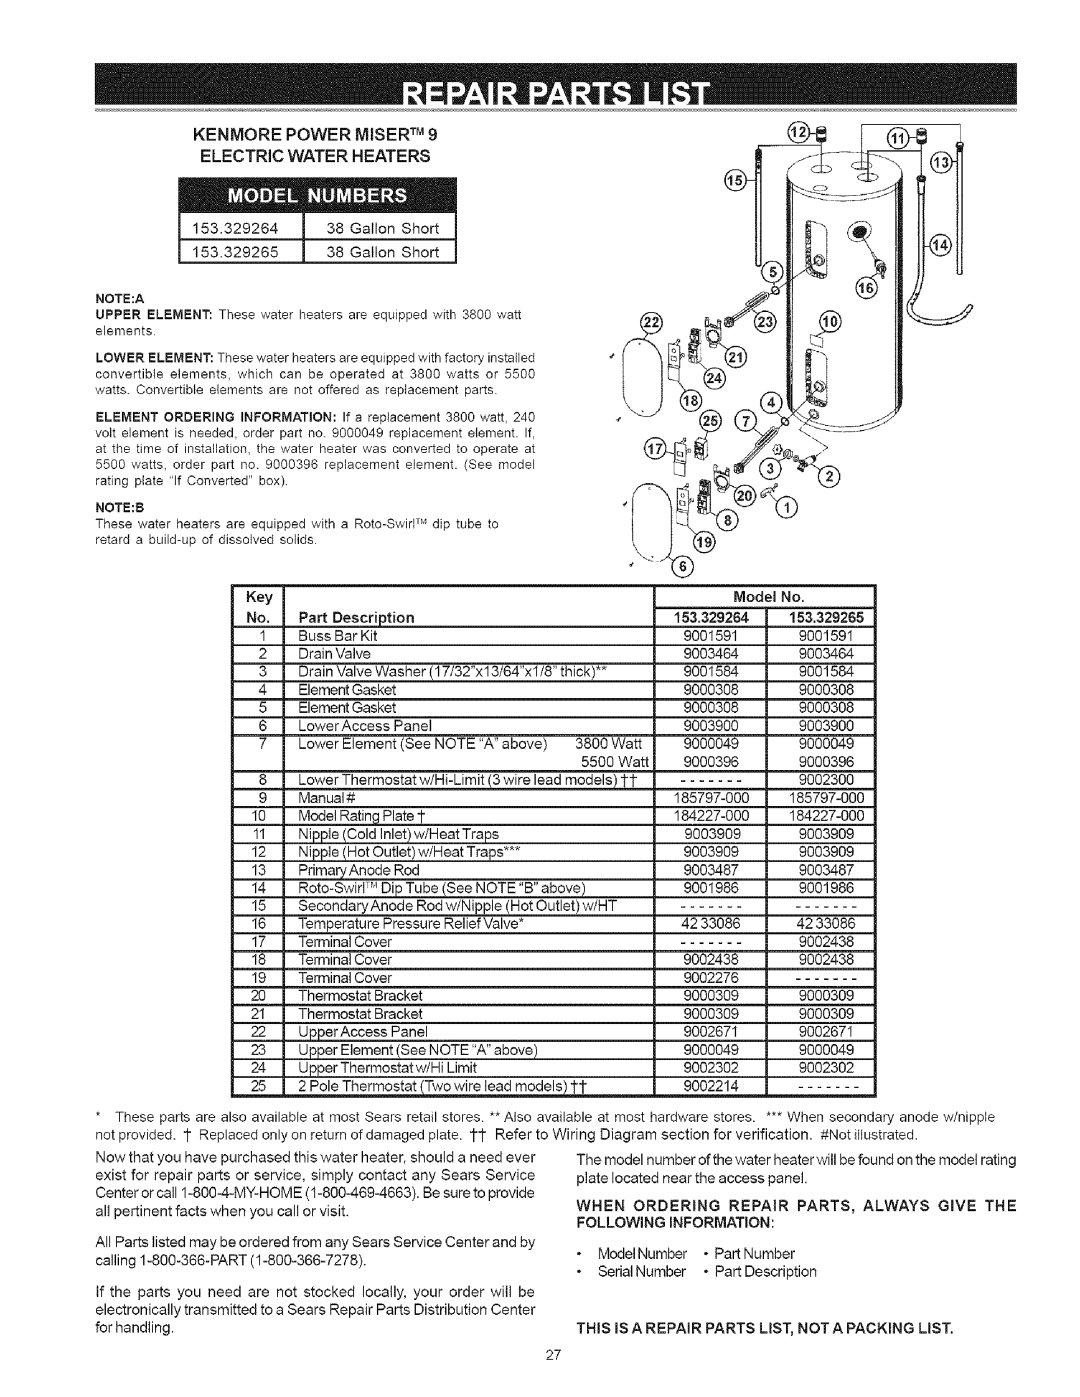 Kenmore 153.329362 30 GALLON instruction manual I 153.329264I 38GallonShortI, Kenmore Power Miser Tm Electric Water Heaters 